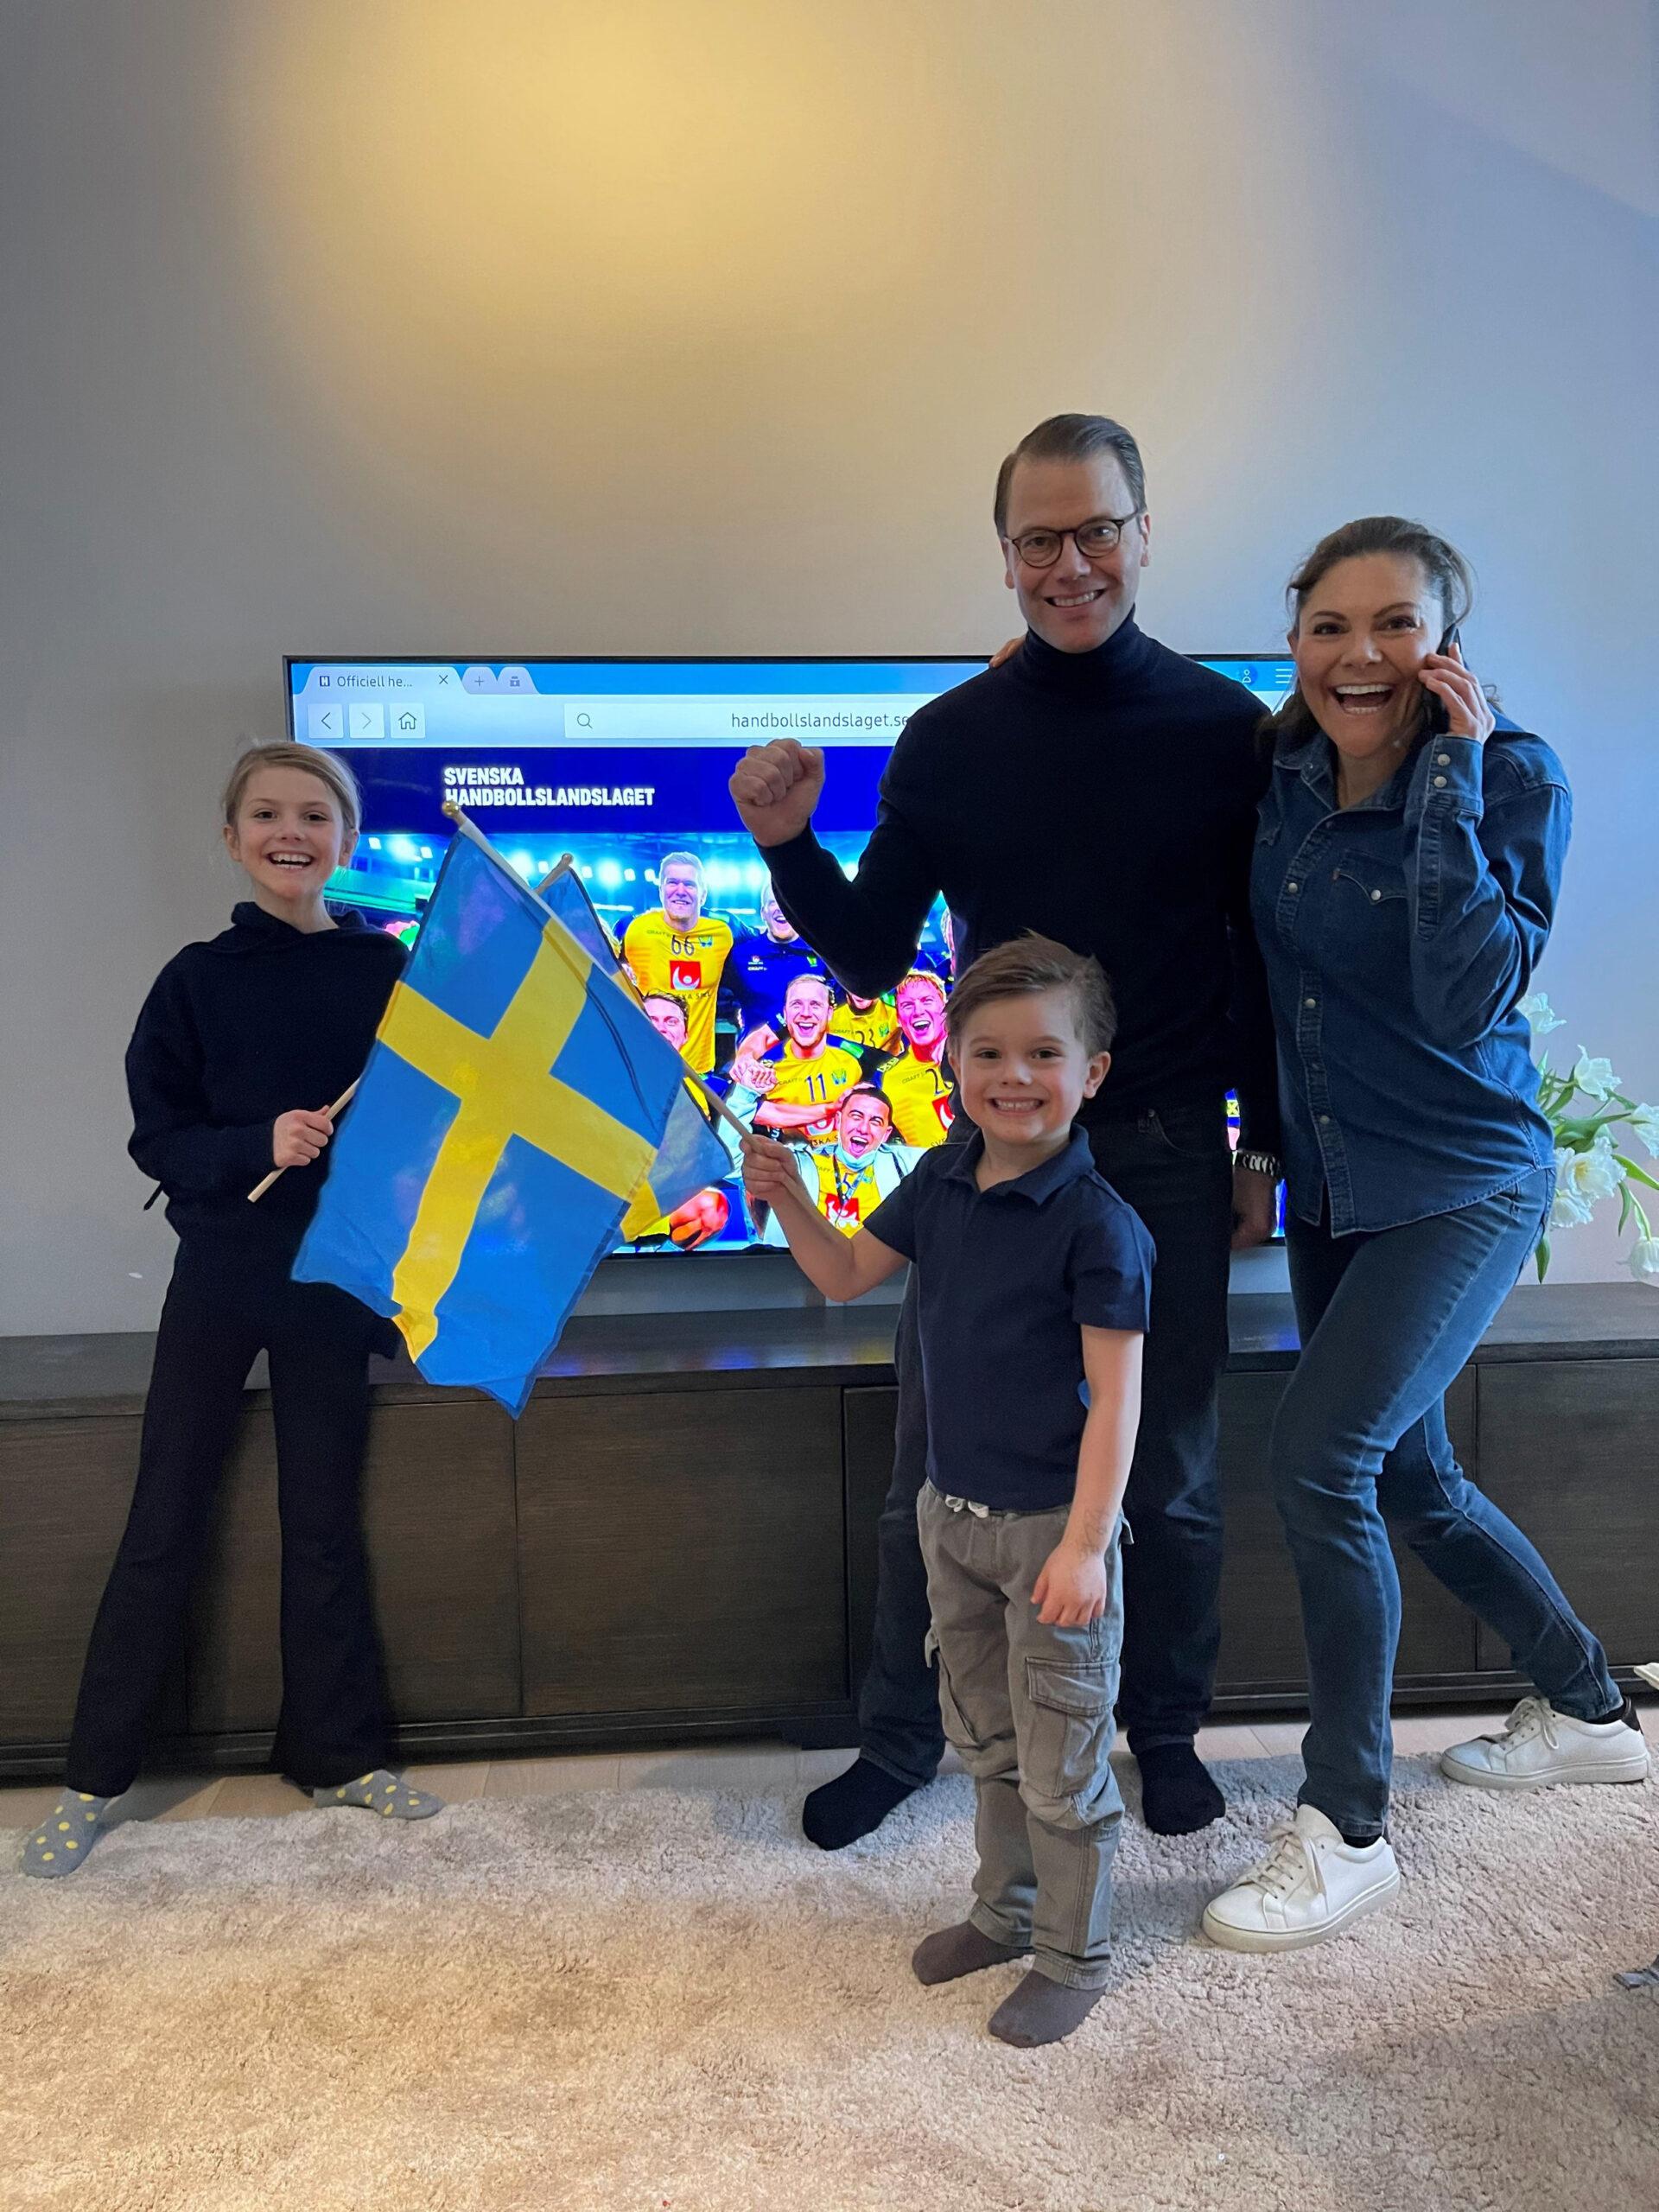 The Crown Princess family waving a flag in front of a telly. Swedish monarchy on a day off.